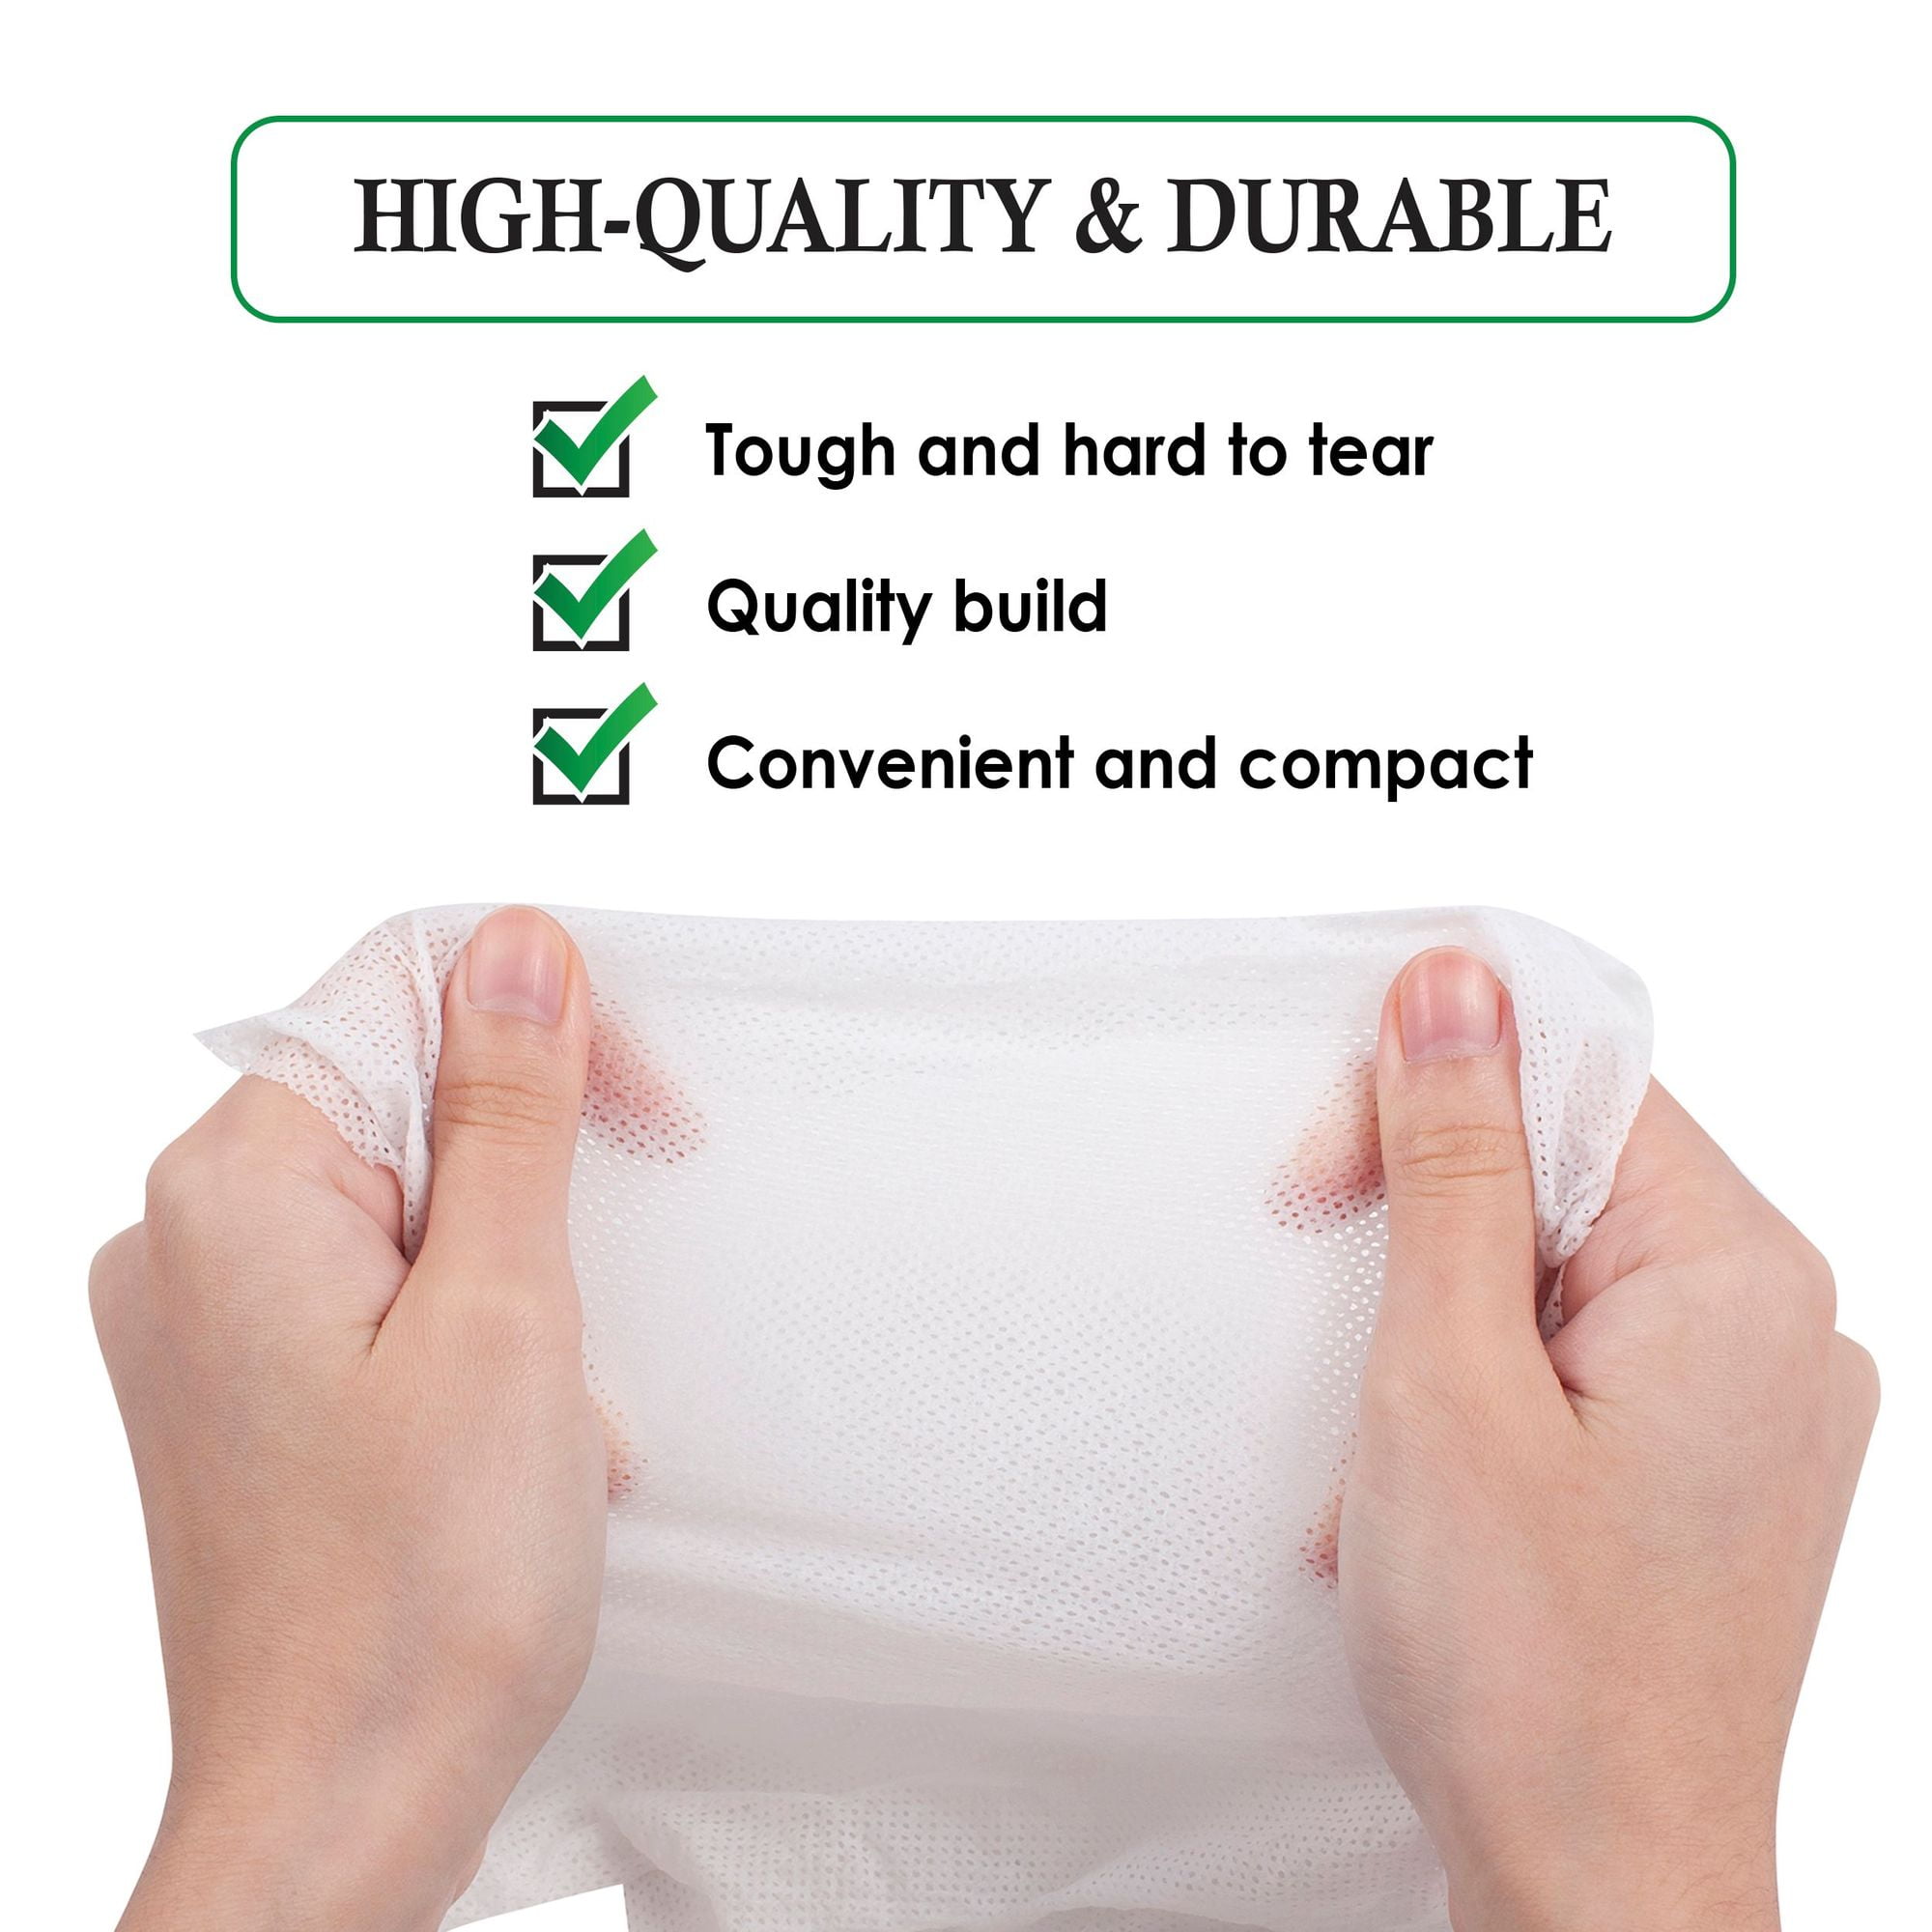 Looking to Buy Soft Yet Durable Mainstays Washcloths. Read This